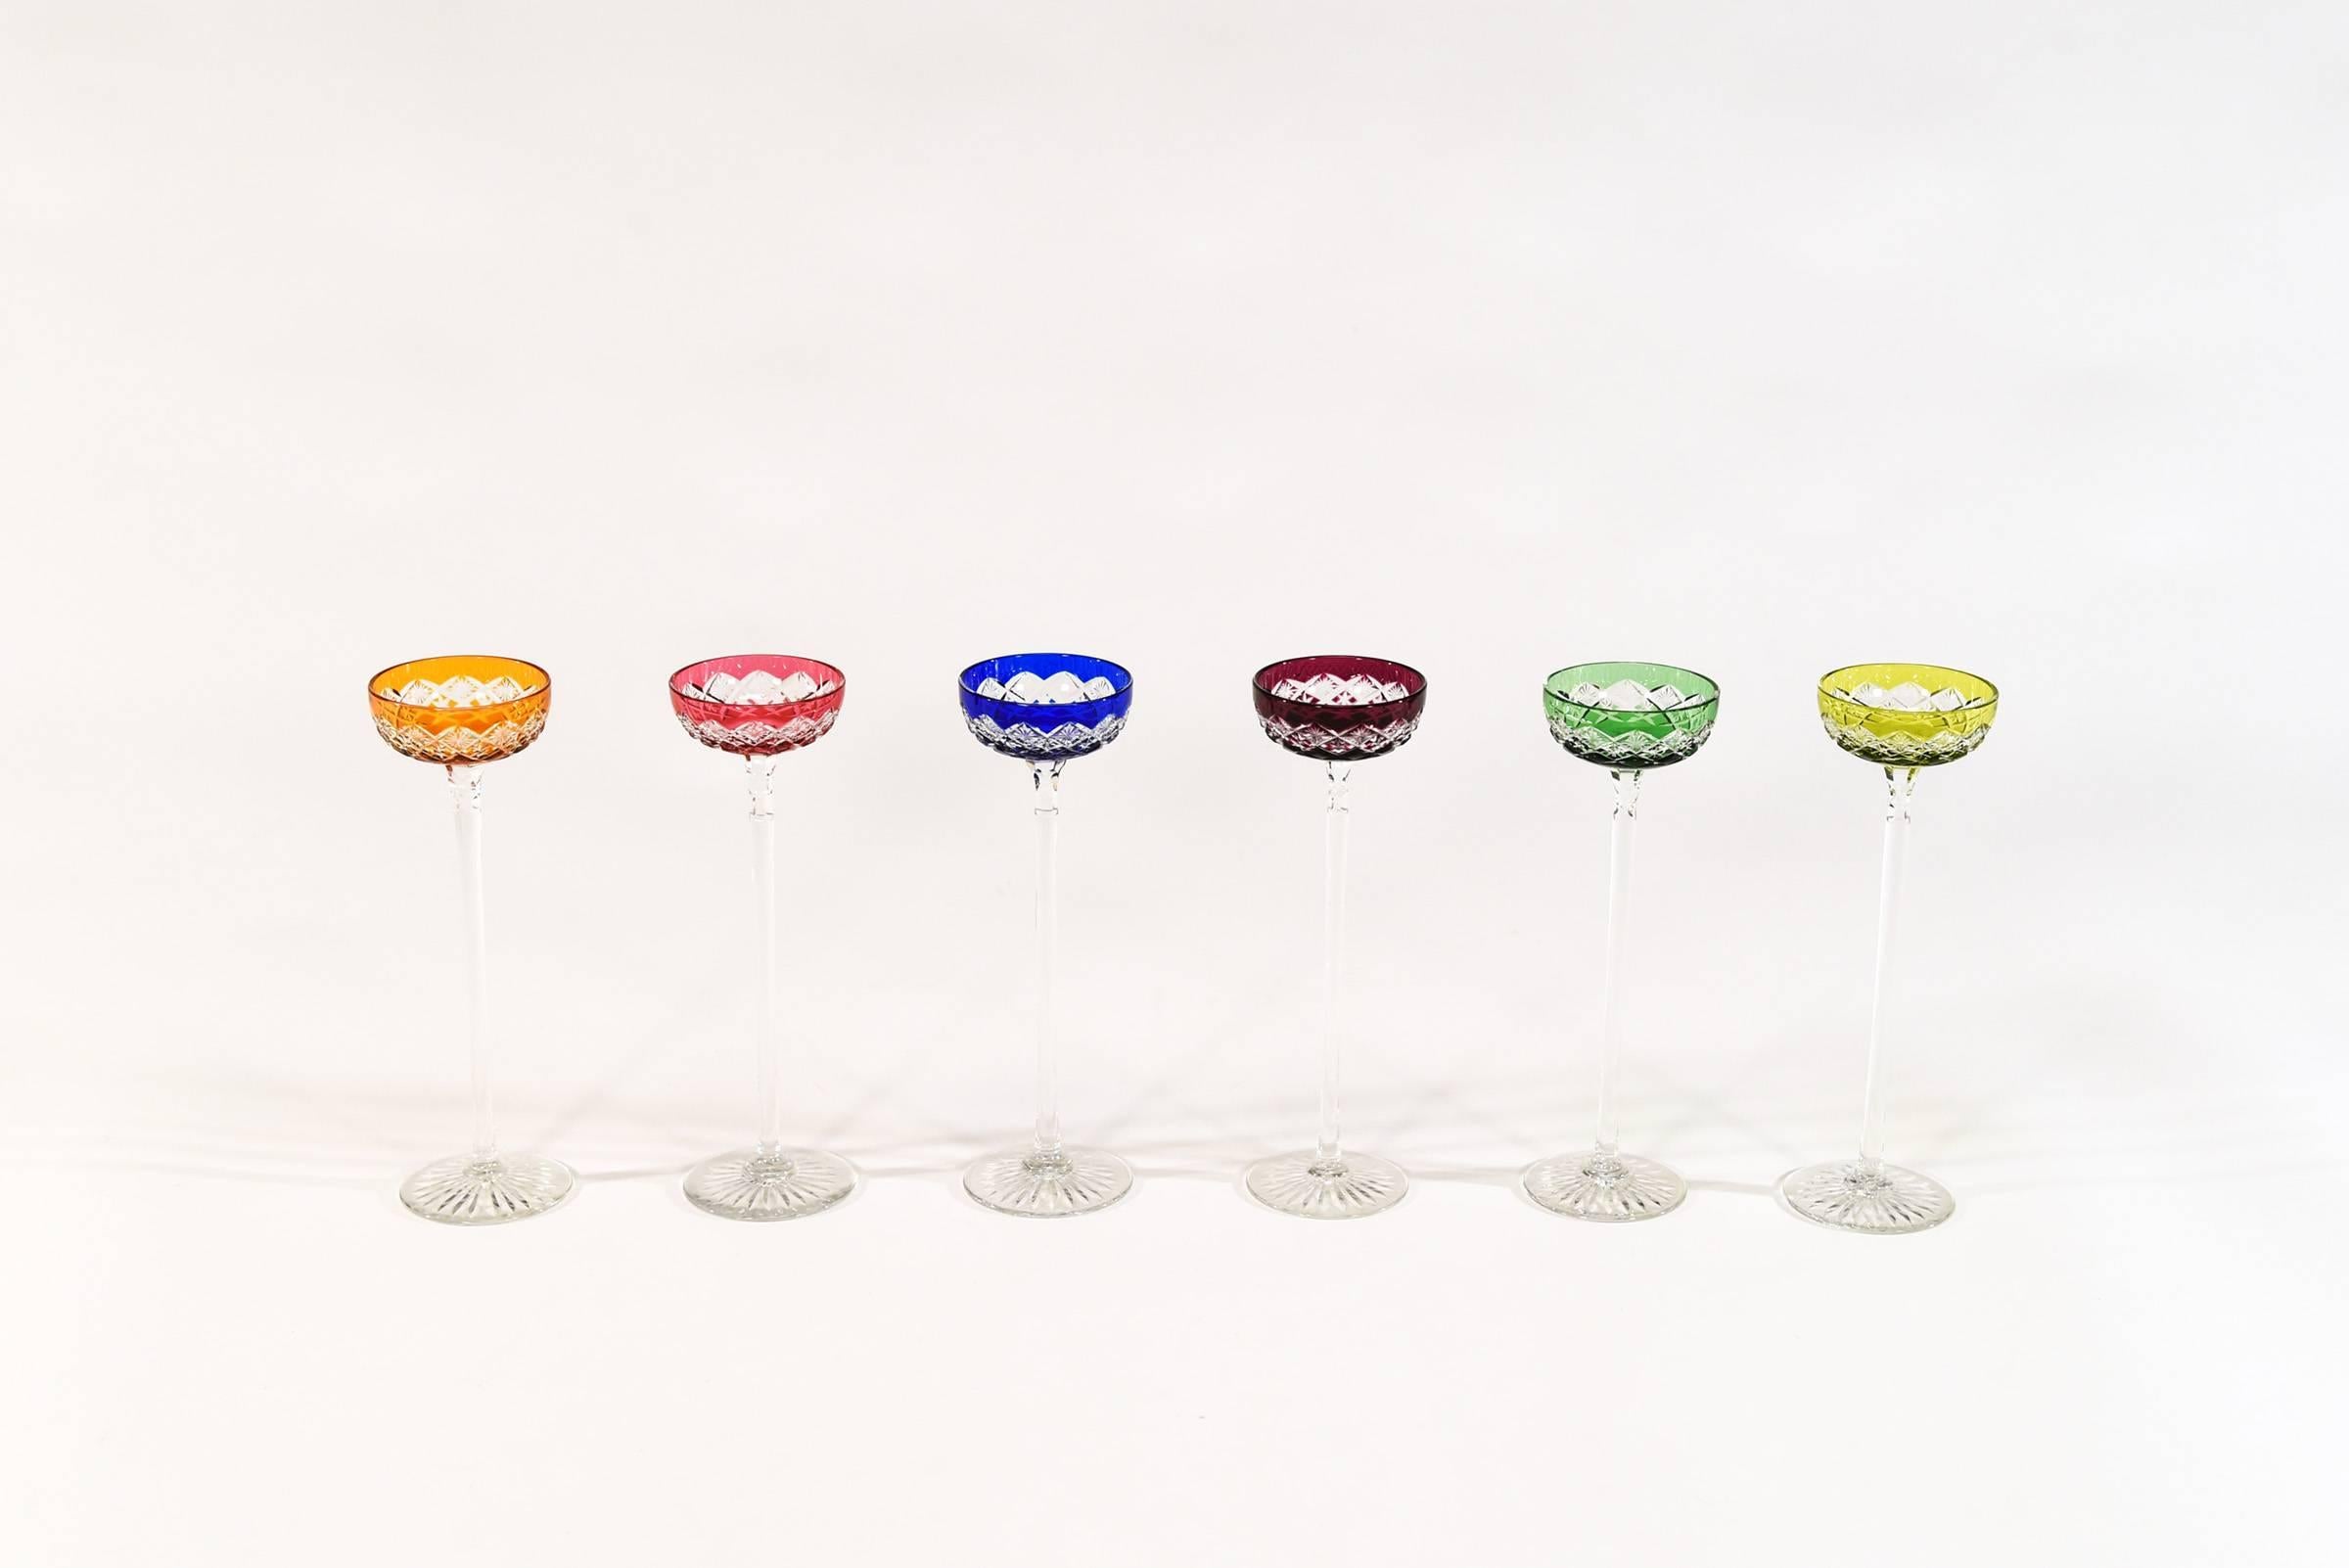 This rare set of 6 Baccarat hand blown cordials is comprised of a range of vibrant jewel-tone colors. Standing 7.88